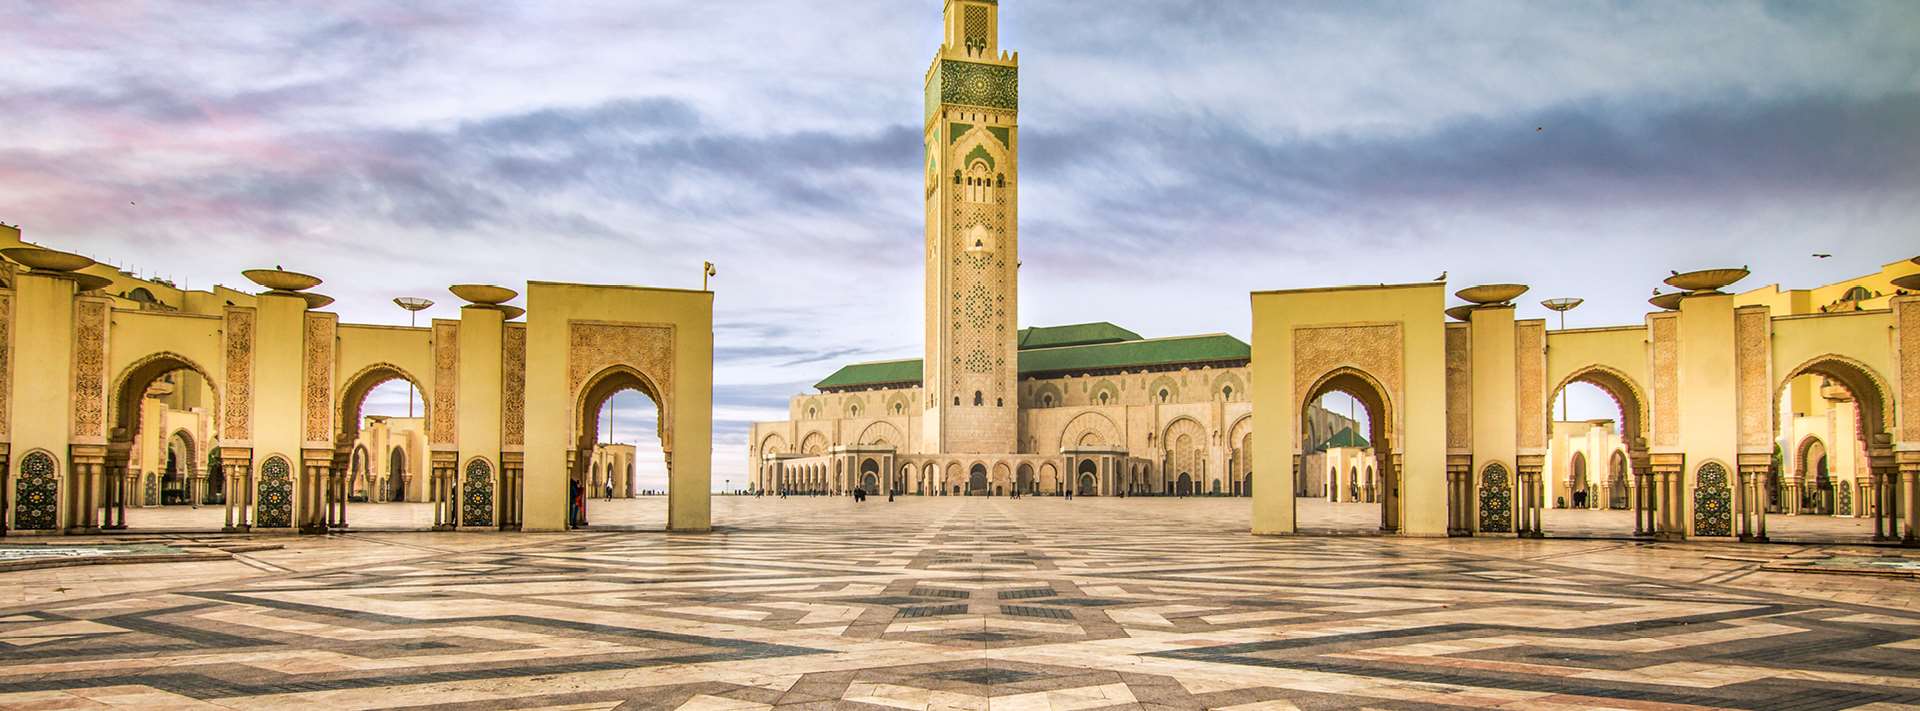 cheap flights to morocco